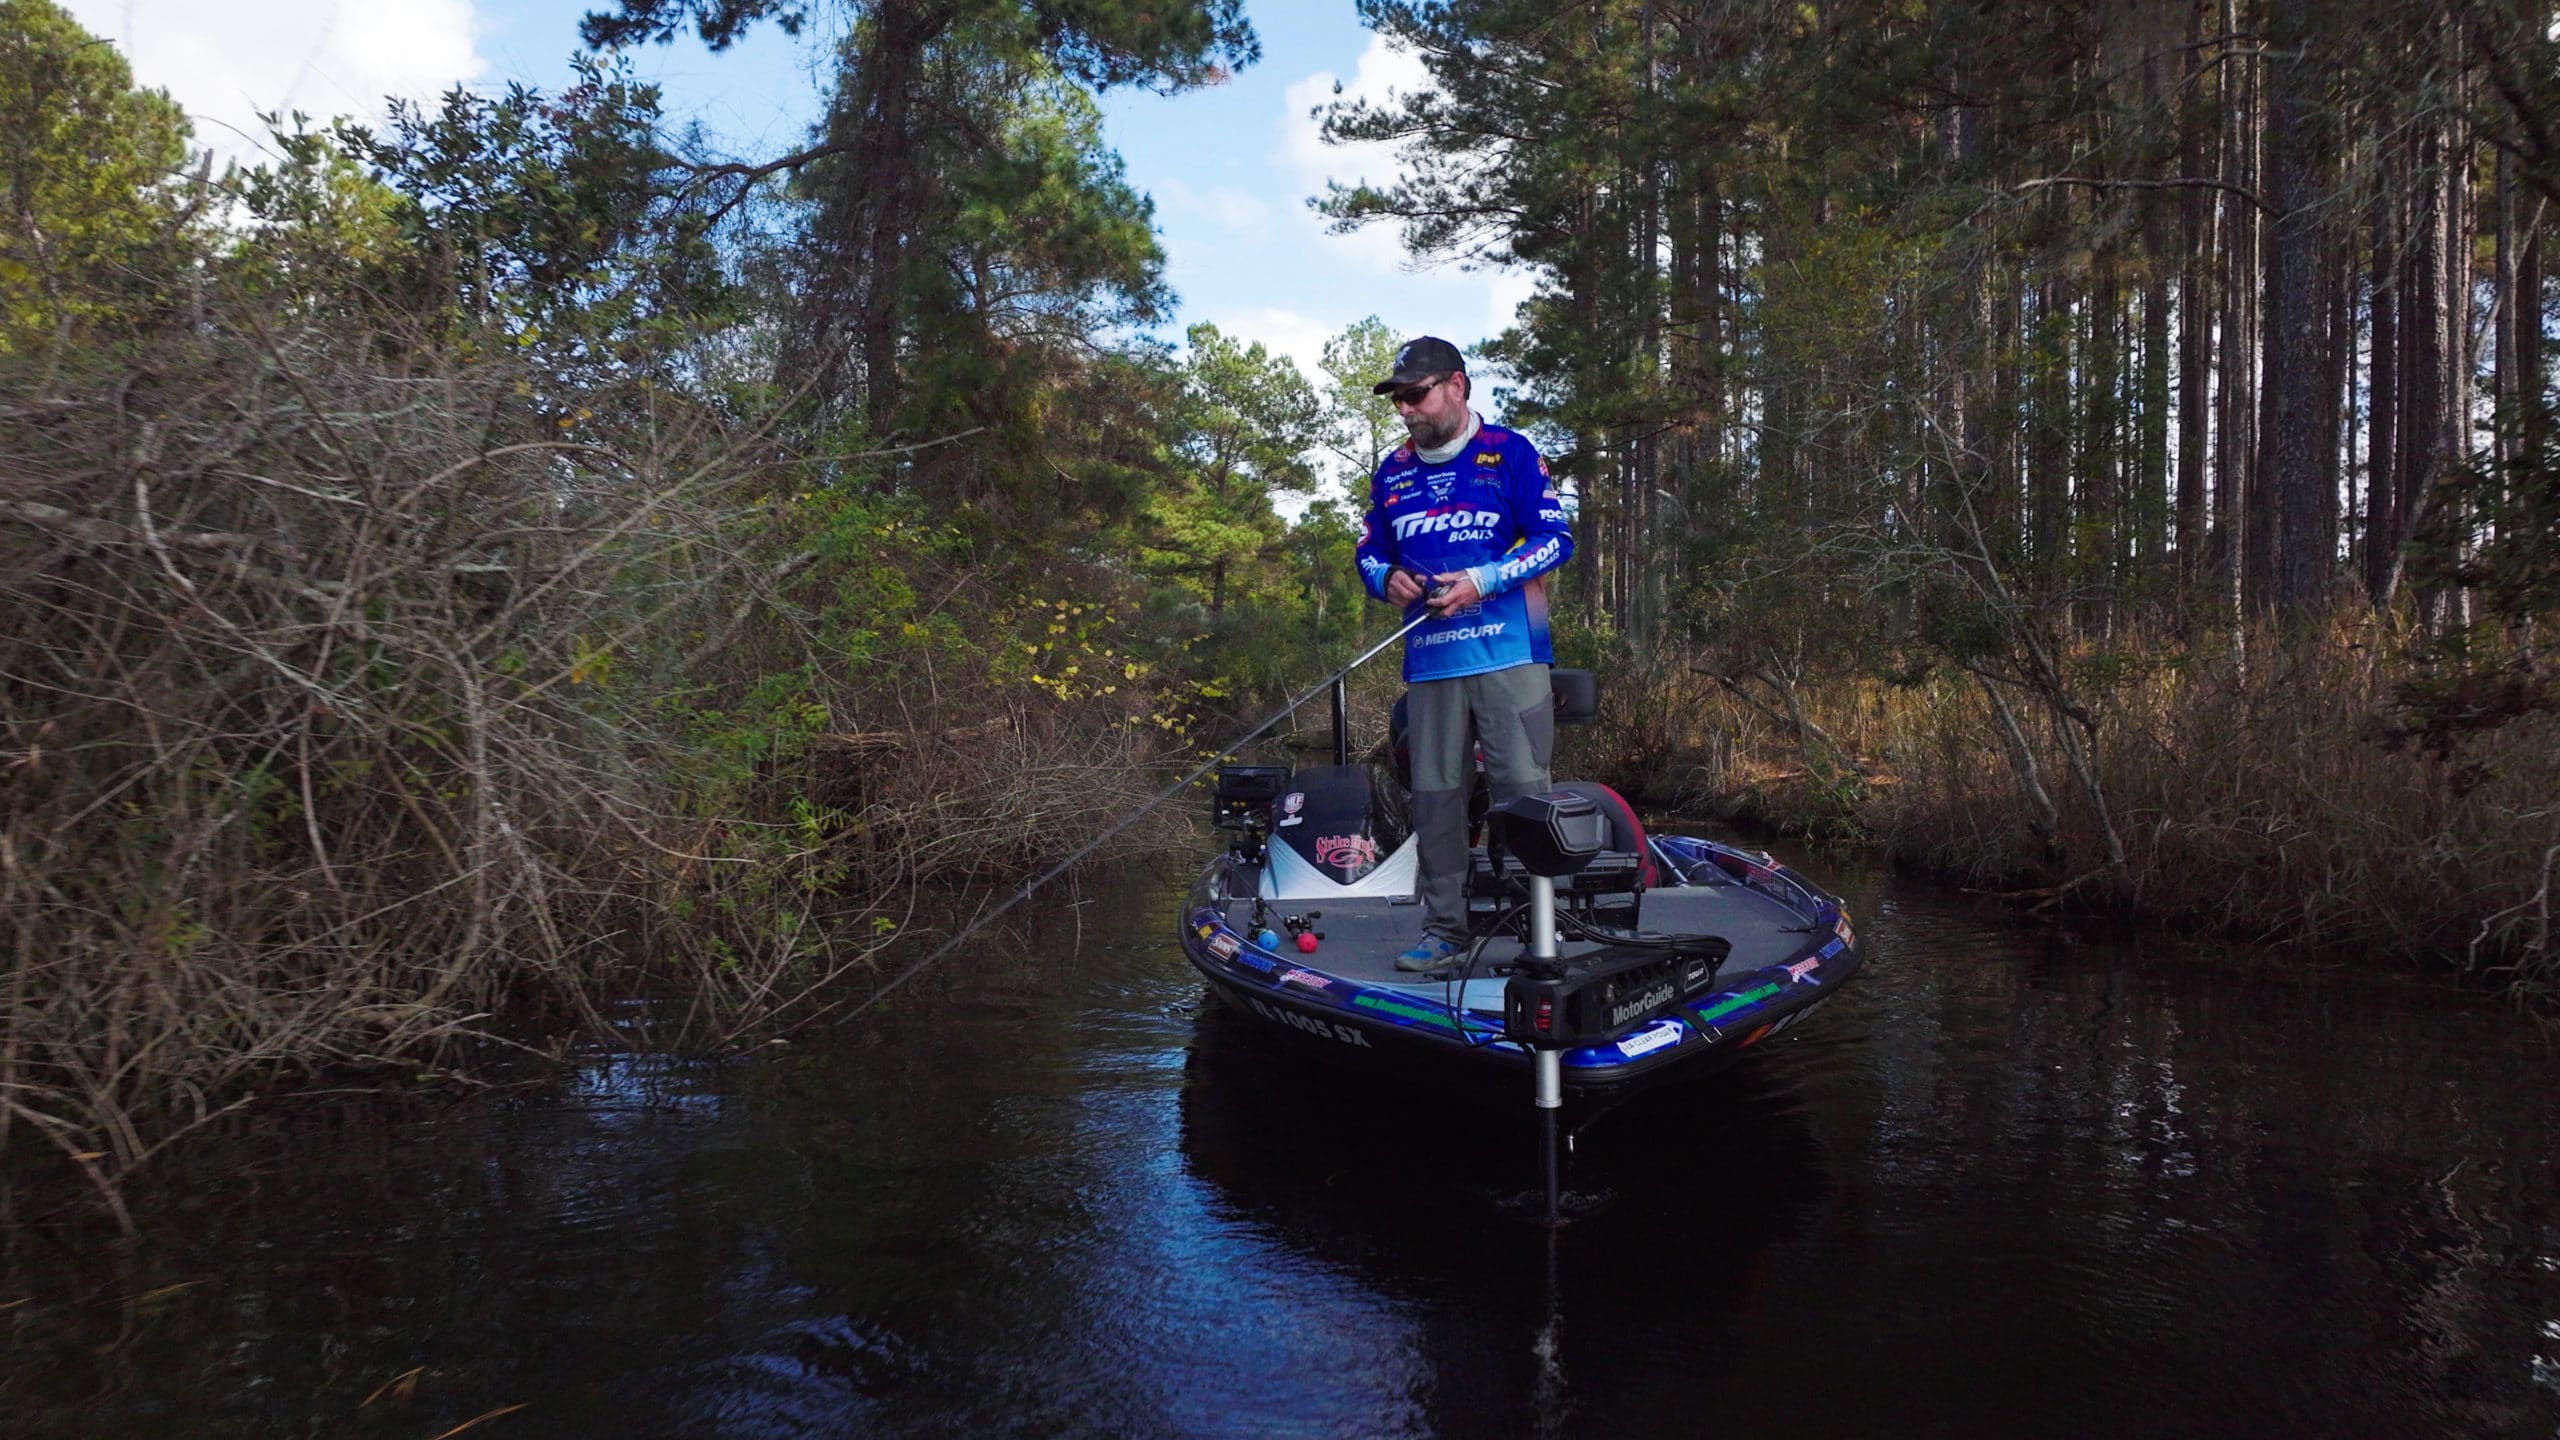 Shaw Grigsby Fishing off of his Bass Boat